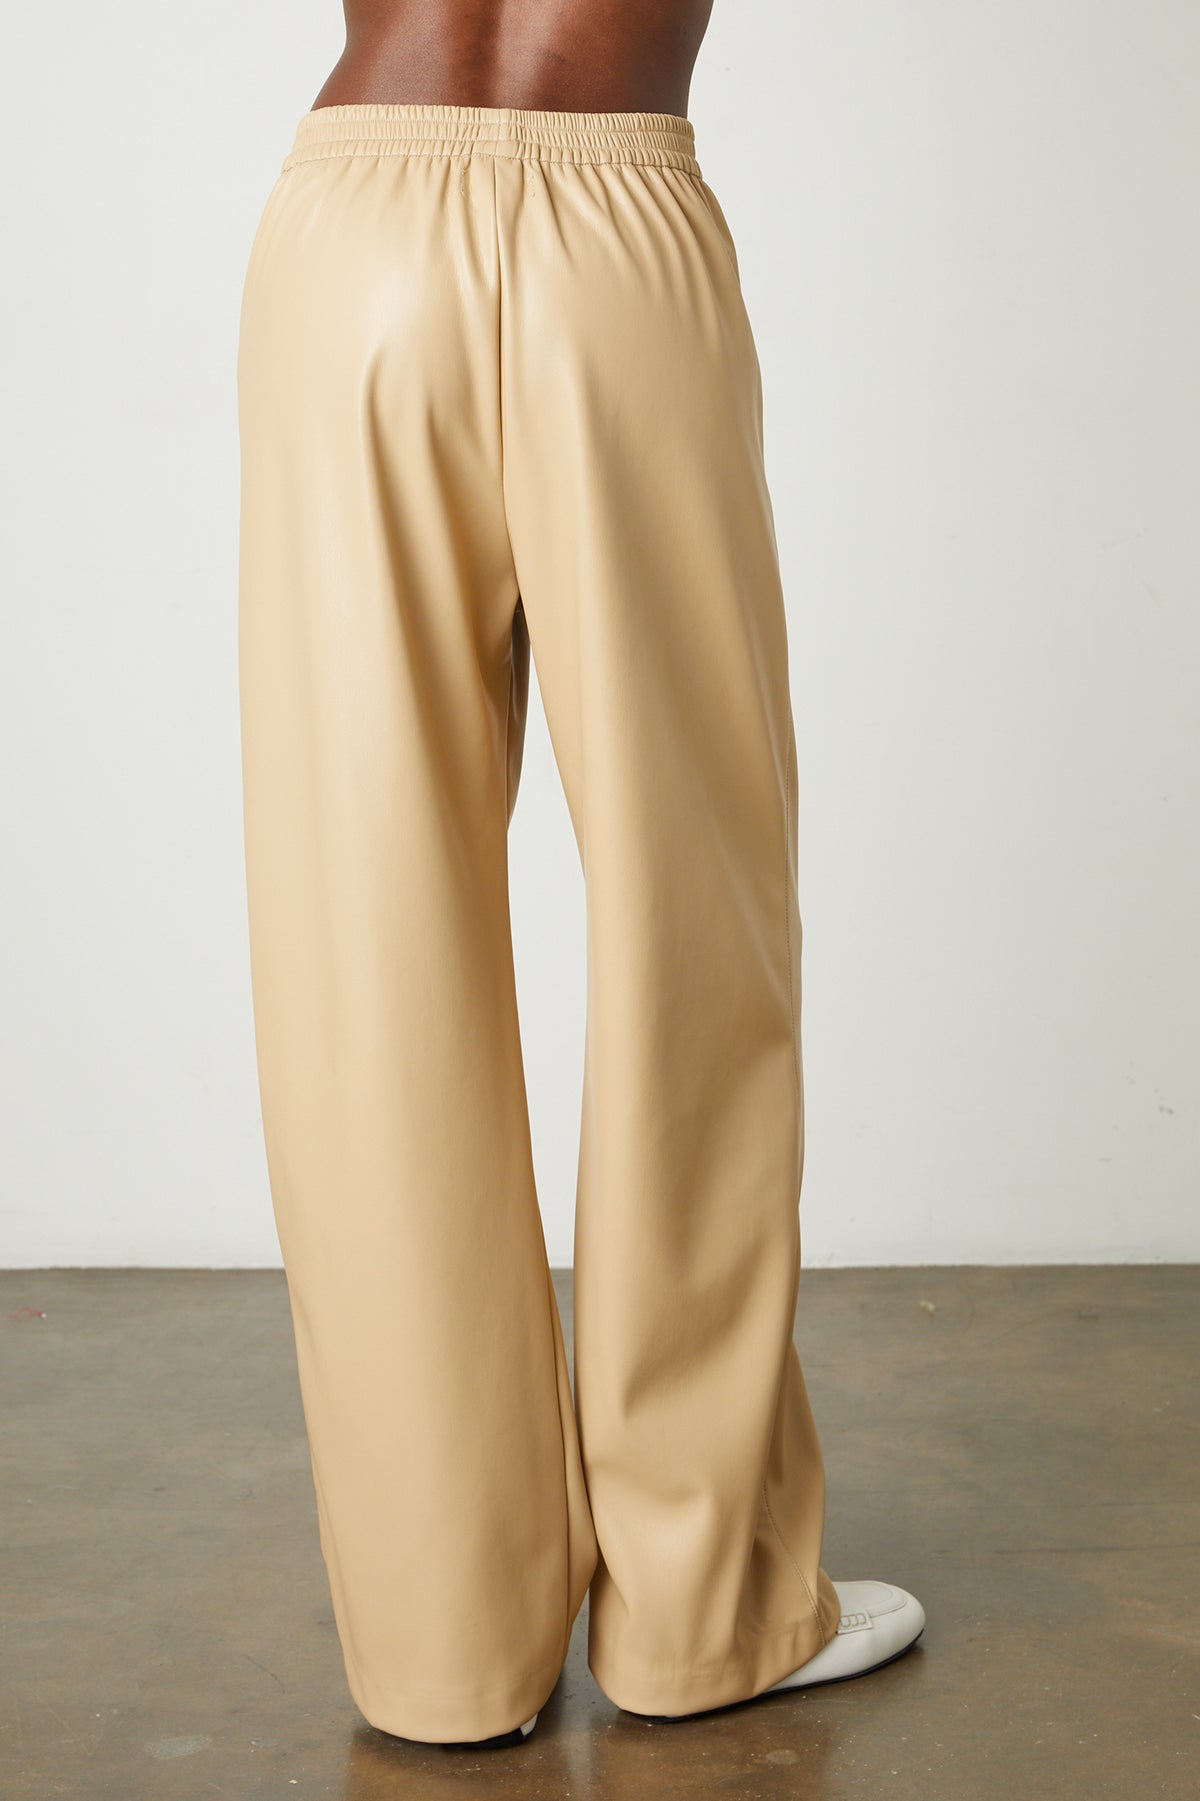   The back view of a woman wearing Velvet by Graham & Spencer's JENNA VEGAN LEATHER WIDE LEG PANT in eco-chic holiday style. 